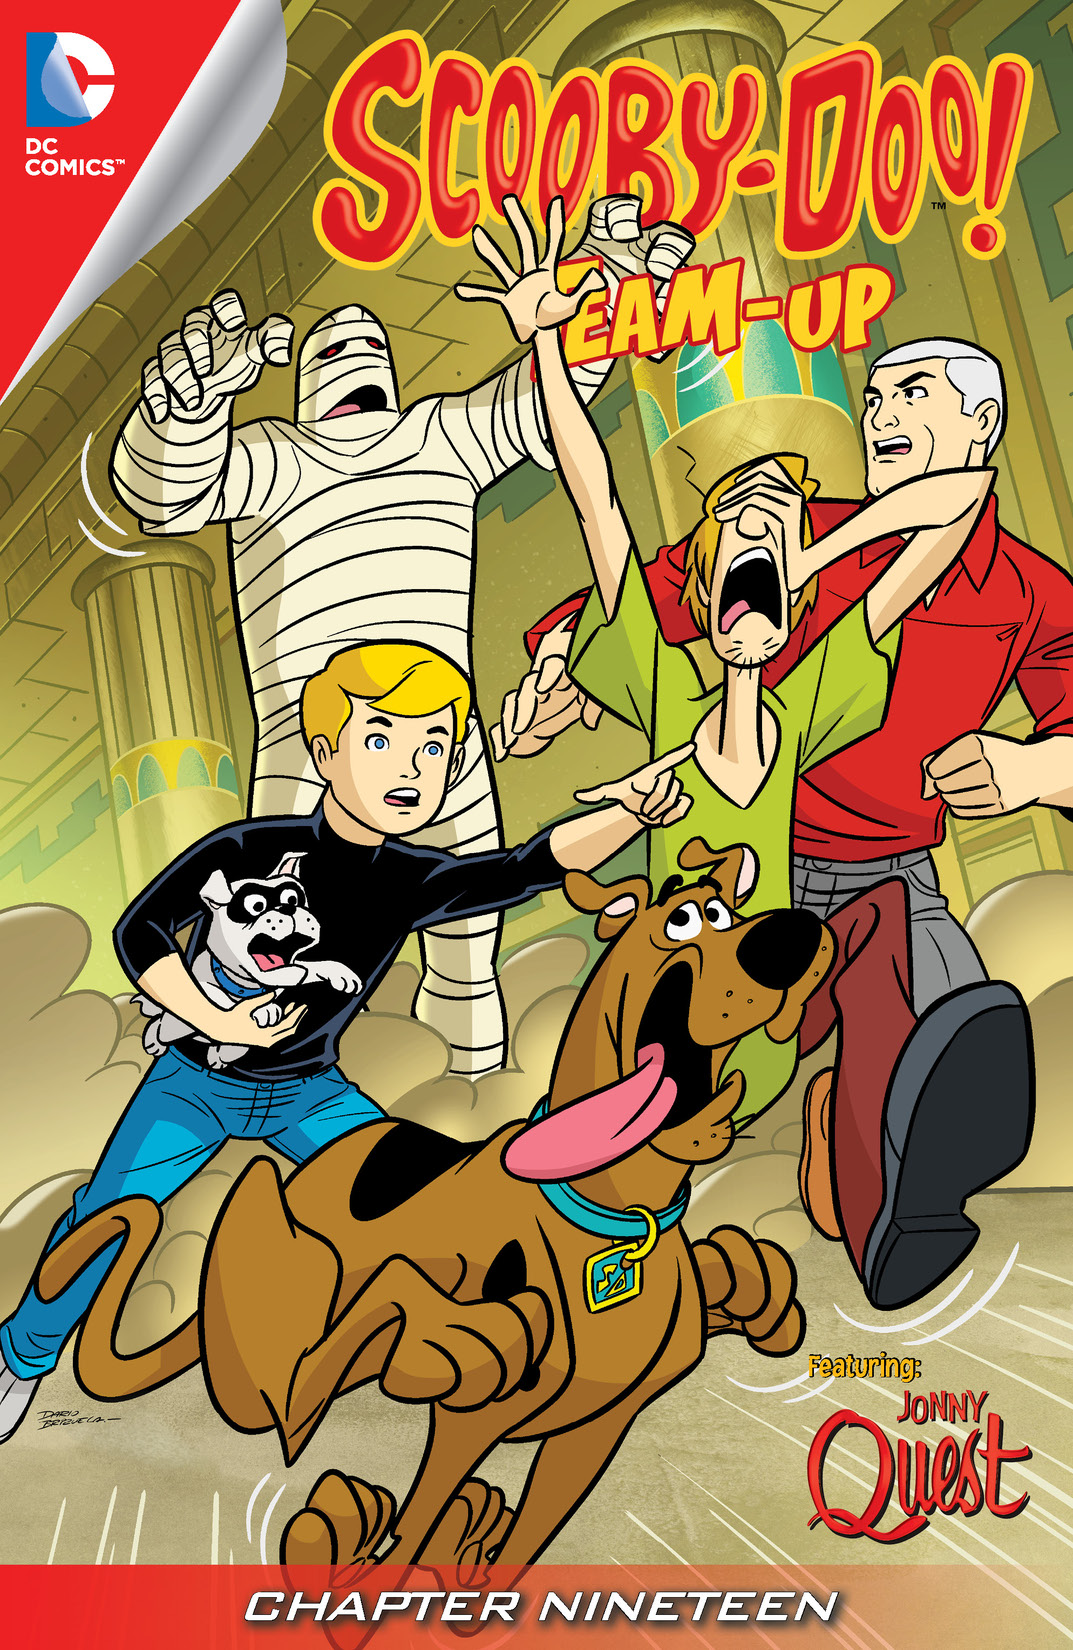 Scooby-Doo Team-Up #19 preview images